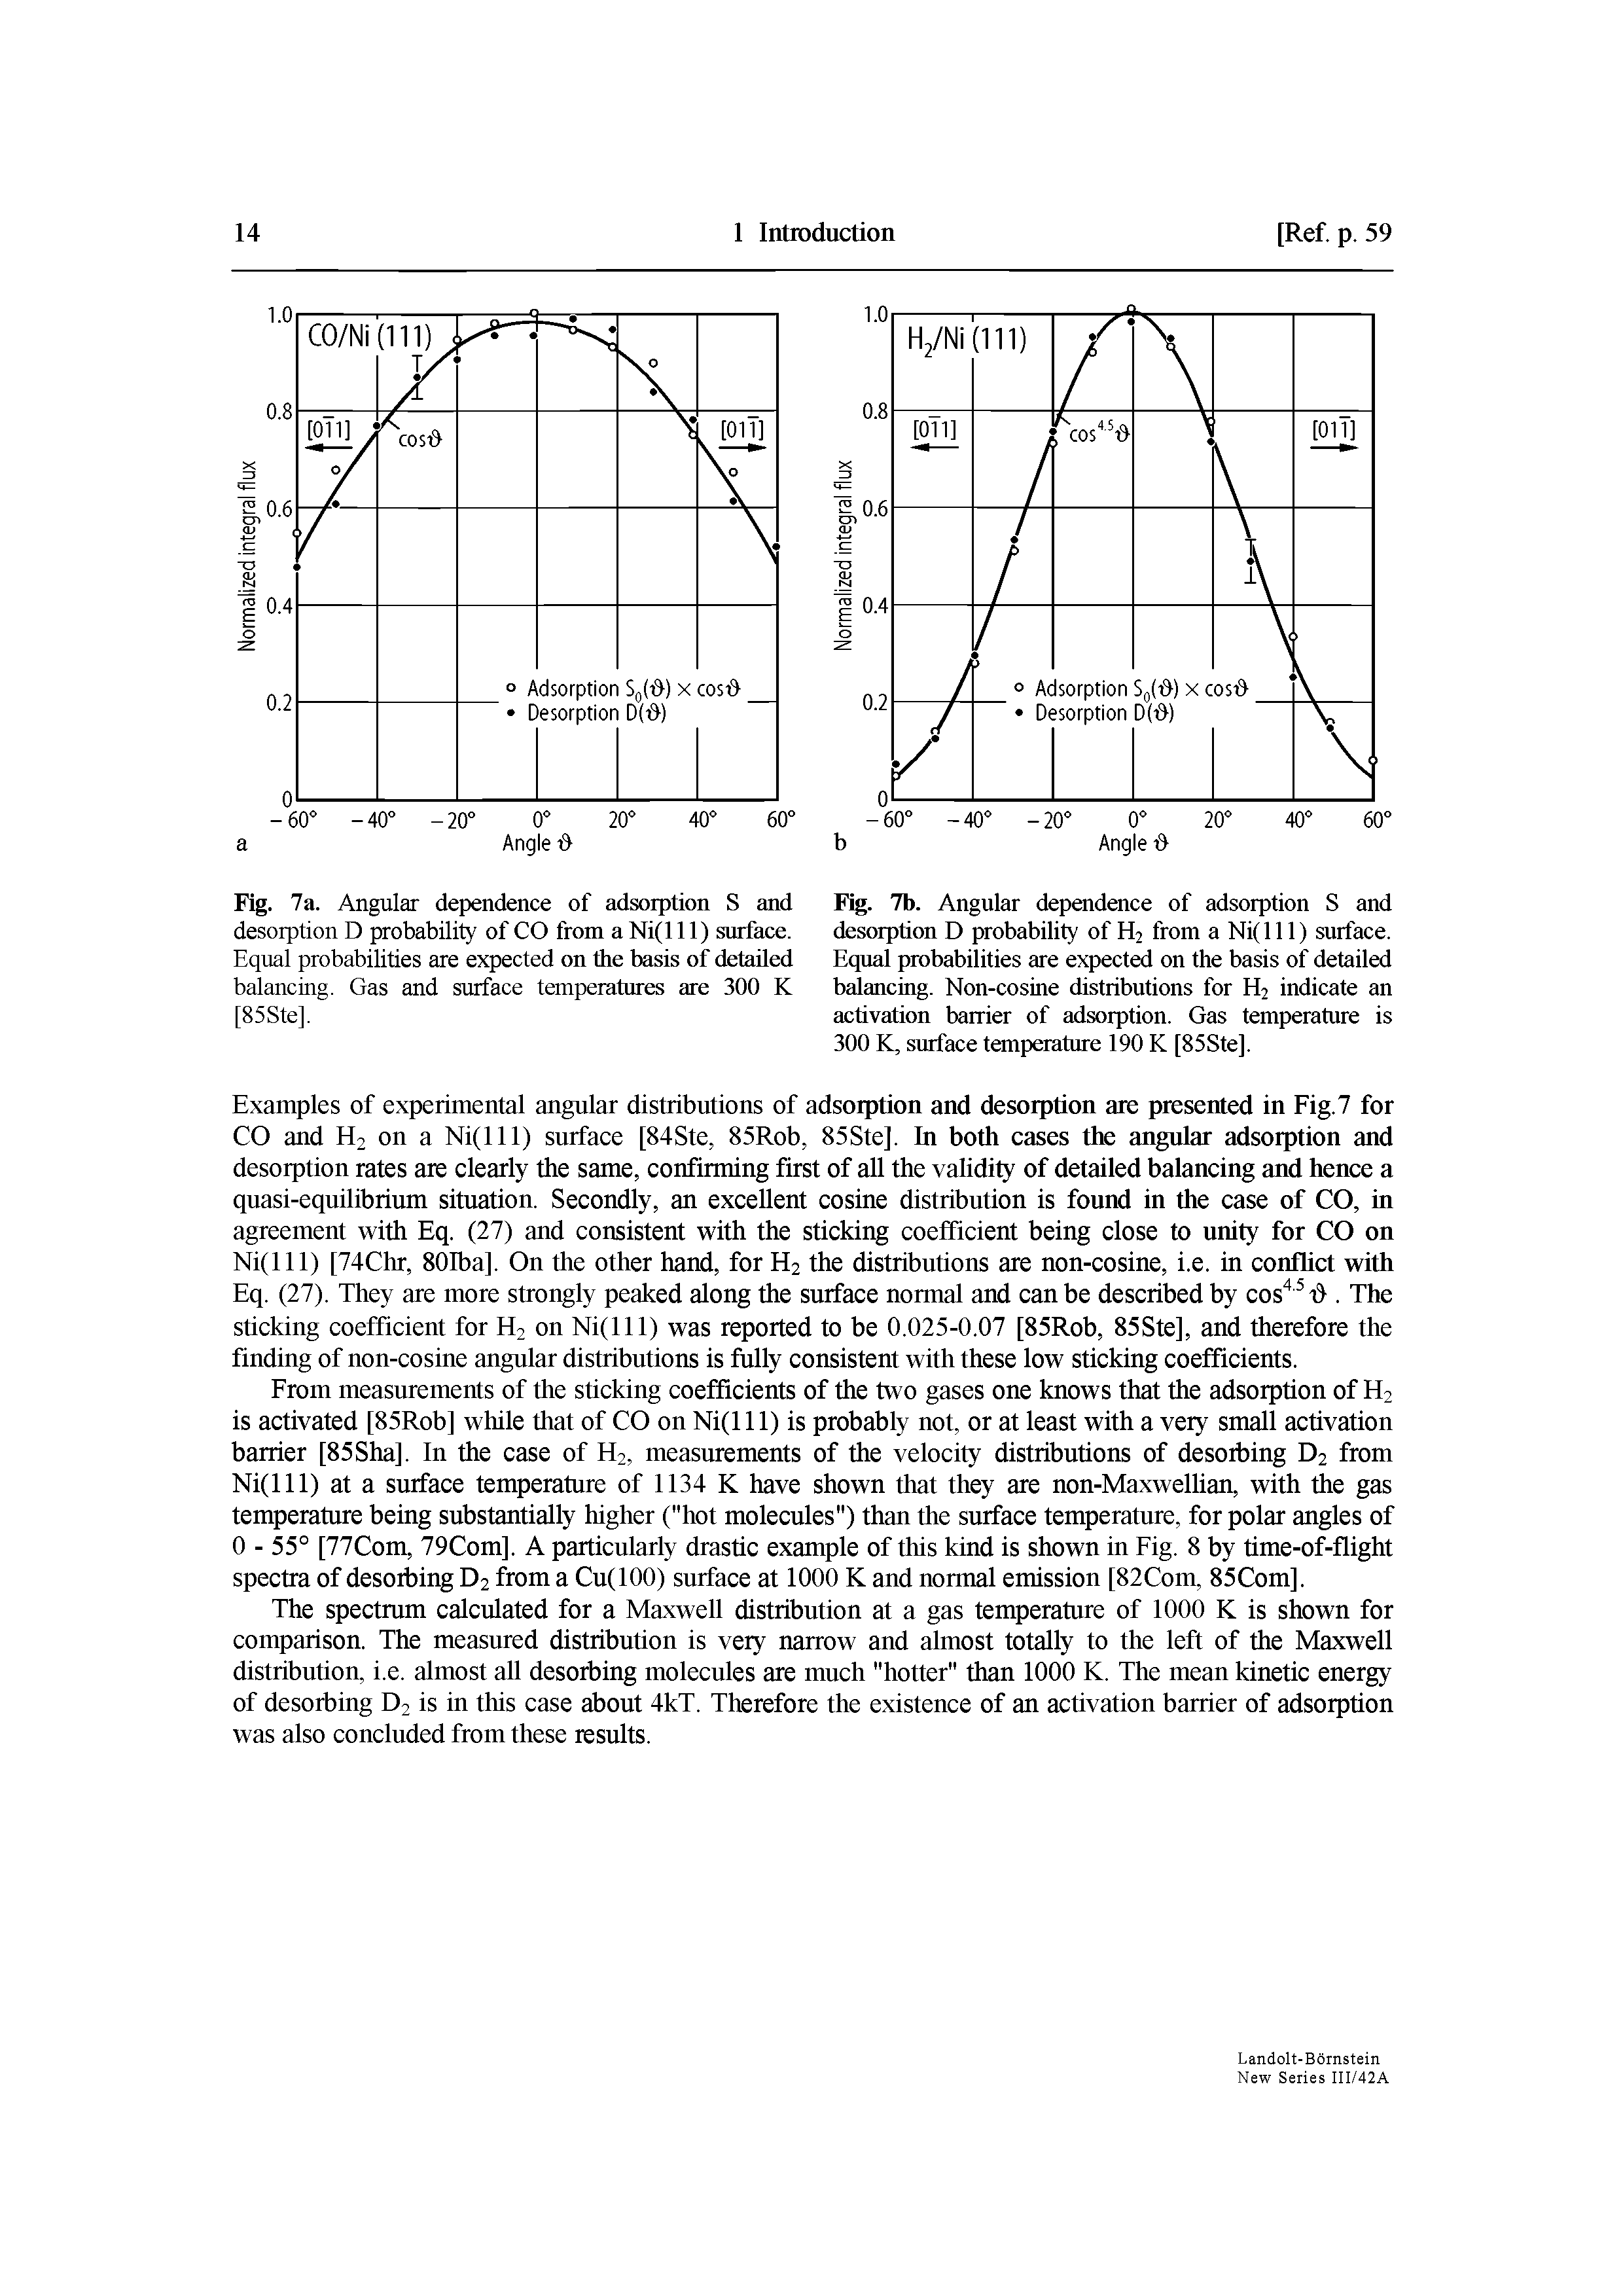 Fig. 7b. Anguiar dependence of adsorption S and desorption D probabiiity of H2 from a Ni(lll) surface. Equal probabilities are expected on the basis of detailed balancing. Non-cosine distributions for H2 indicate an activation barrier of adsorption. Gas temperature is 300 K, surface temperature 190 K [85Ste].